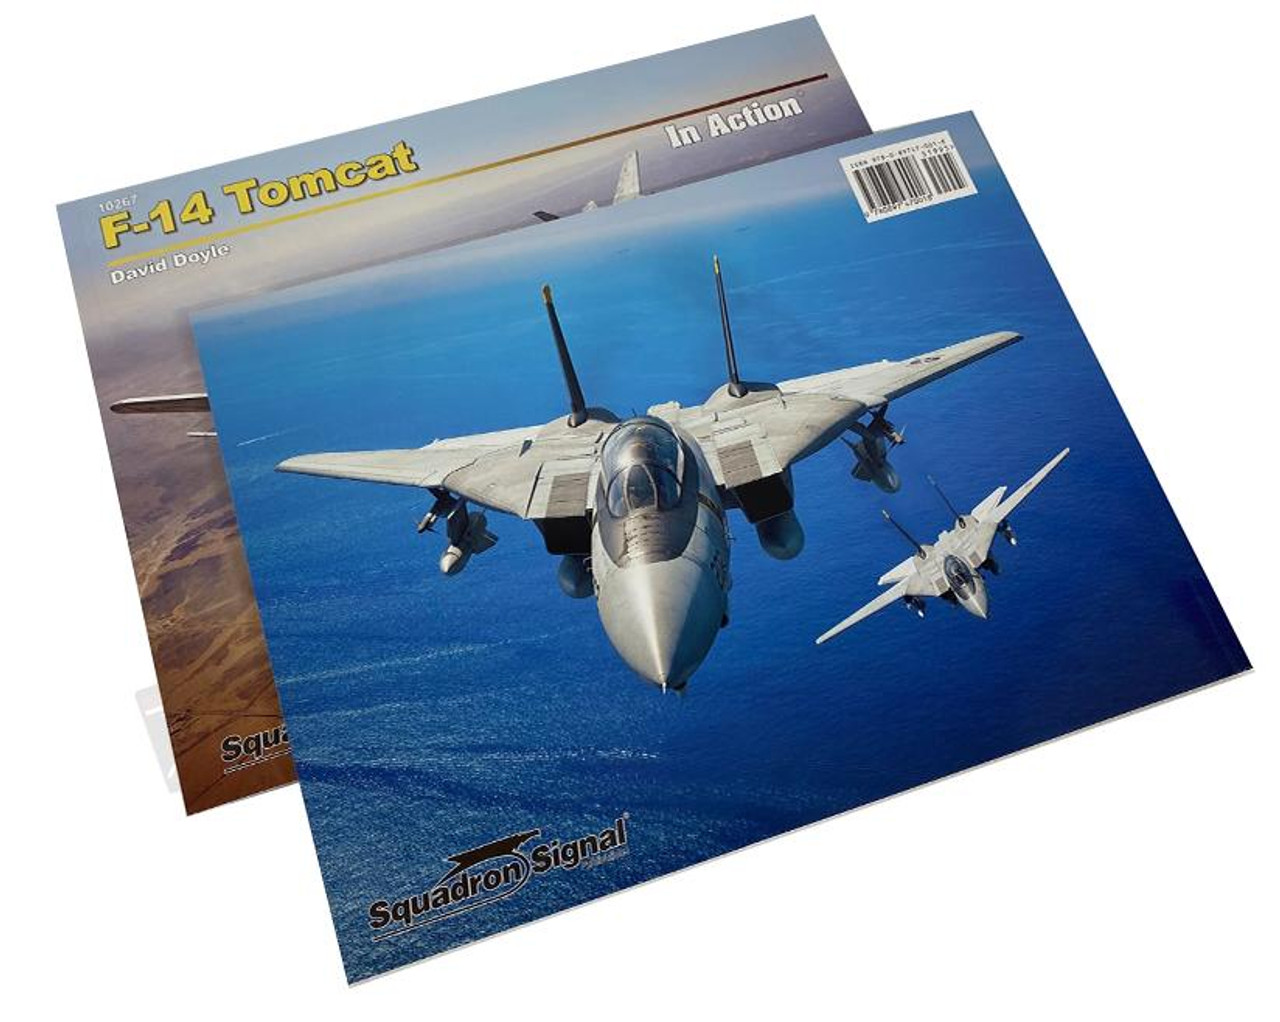 SS10267 Squadron Signal Book - F-14 Tomcat In Action 10267 MMD Squadron